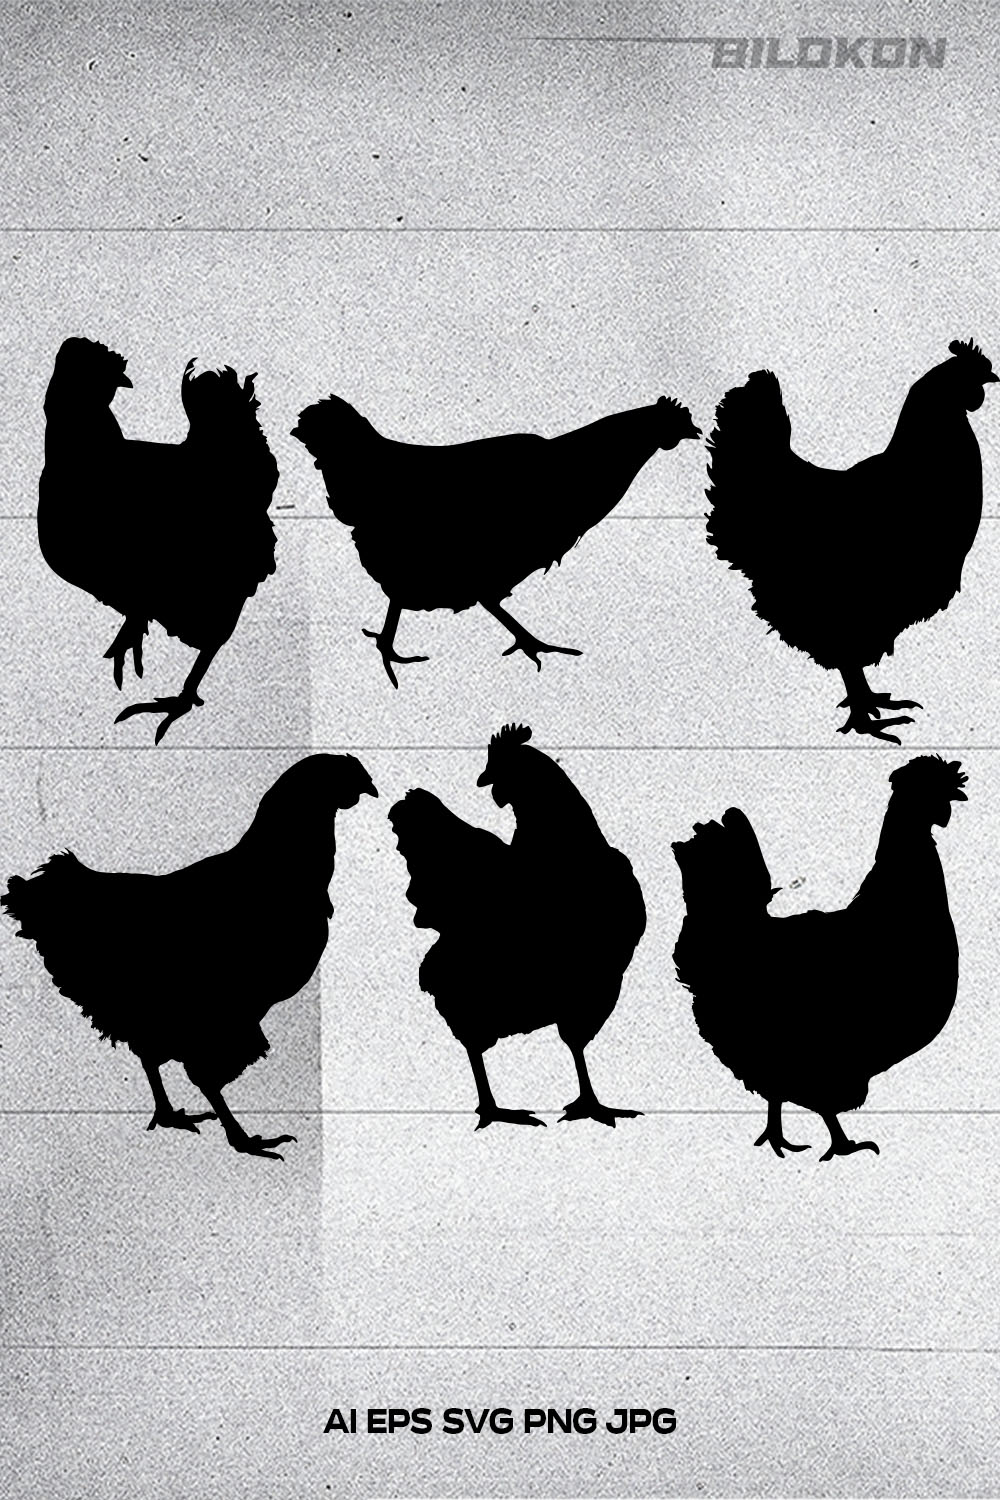 Group of chickens standing next to each other.